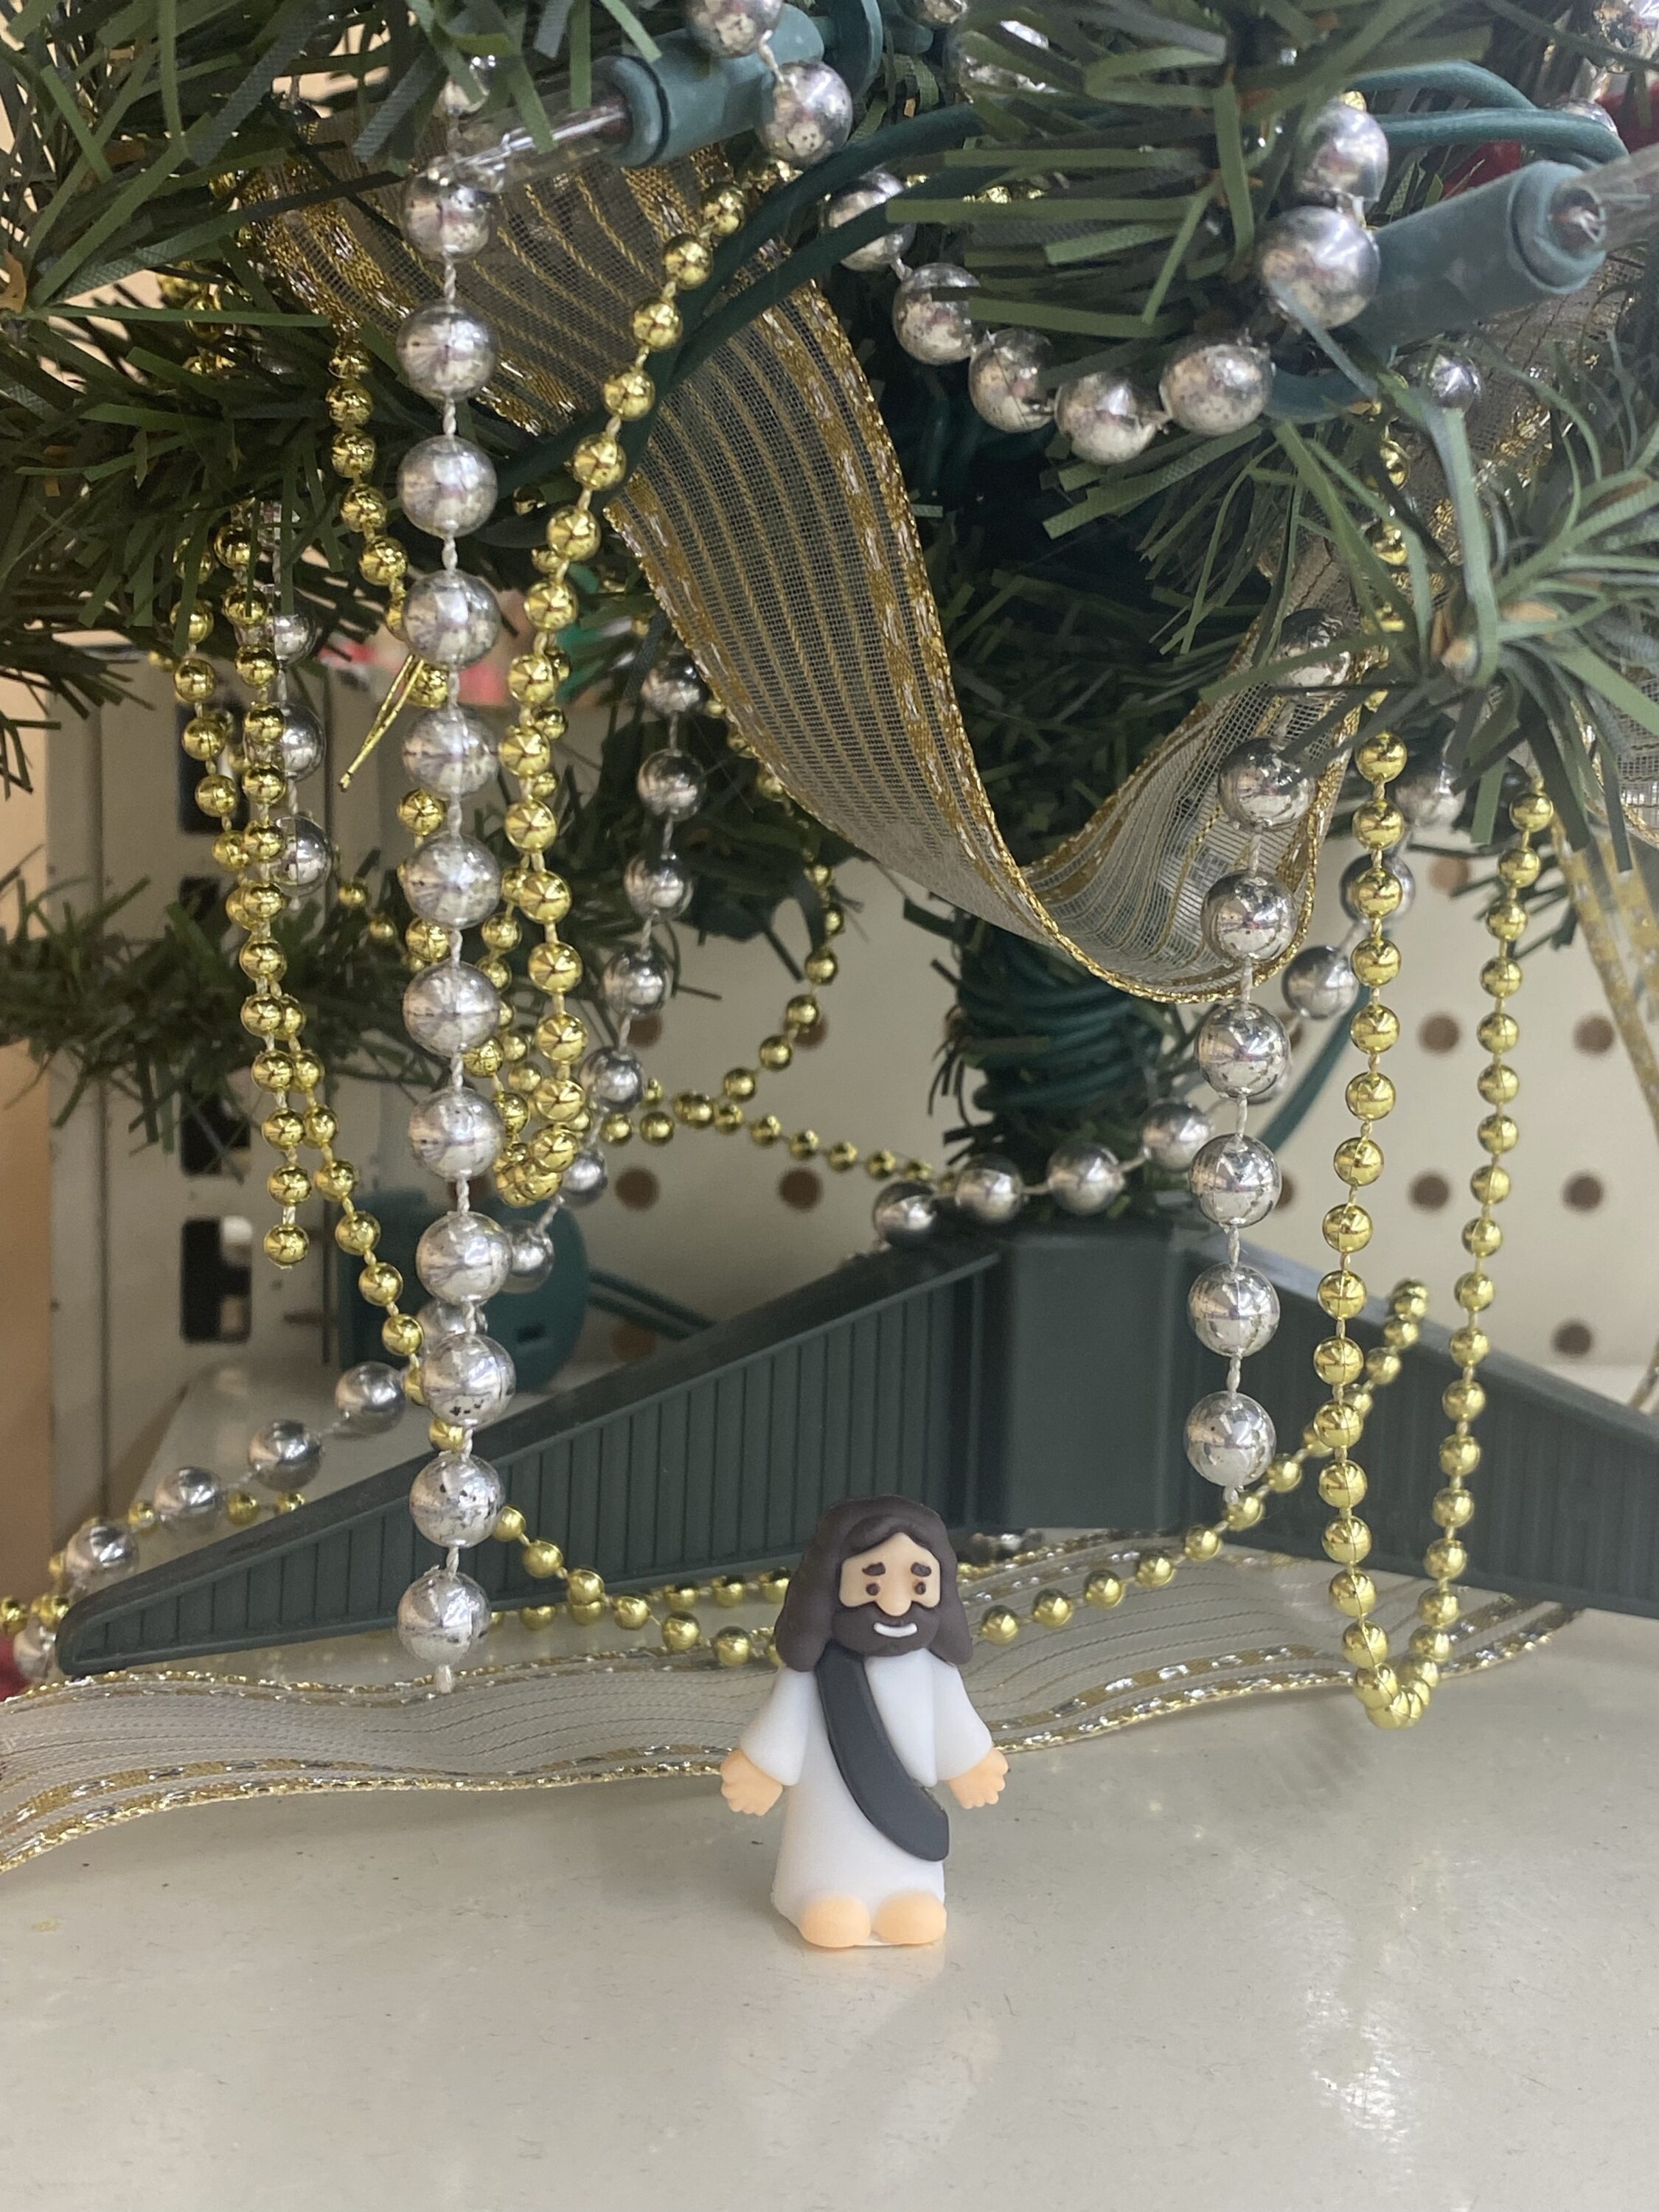 Place Little Jesus with Christmas decorations. Jesus is the greatest gift ever given. 